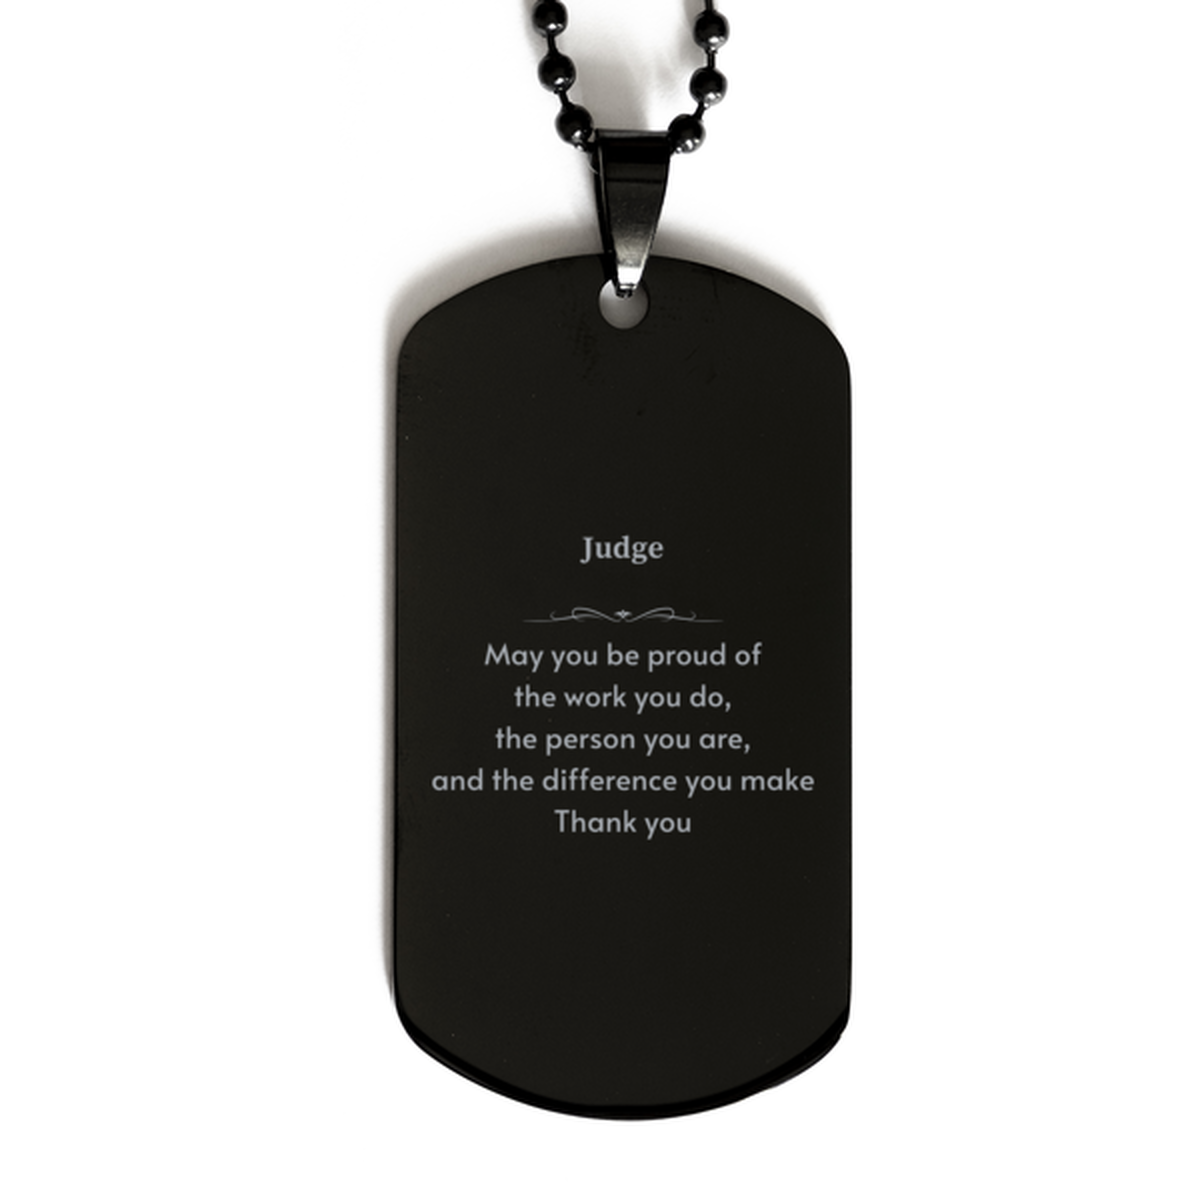 Heartwarming Black Dog Tag Retirement Coworkers Gifts for Judge, Judge May You be proud of the work you do, the person you are Gifts for Boss Men Women Friends